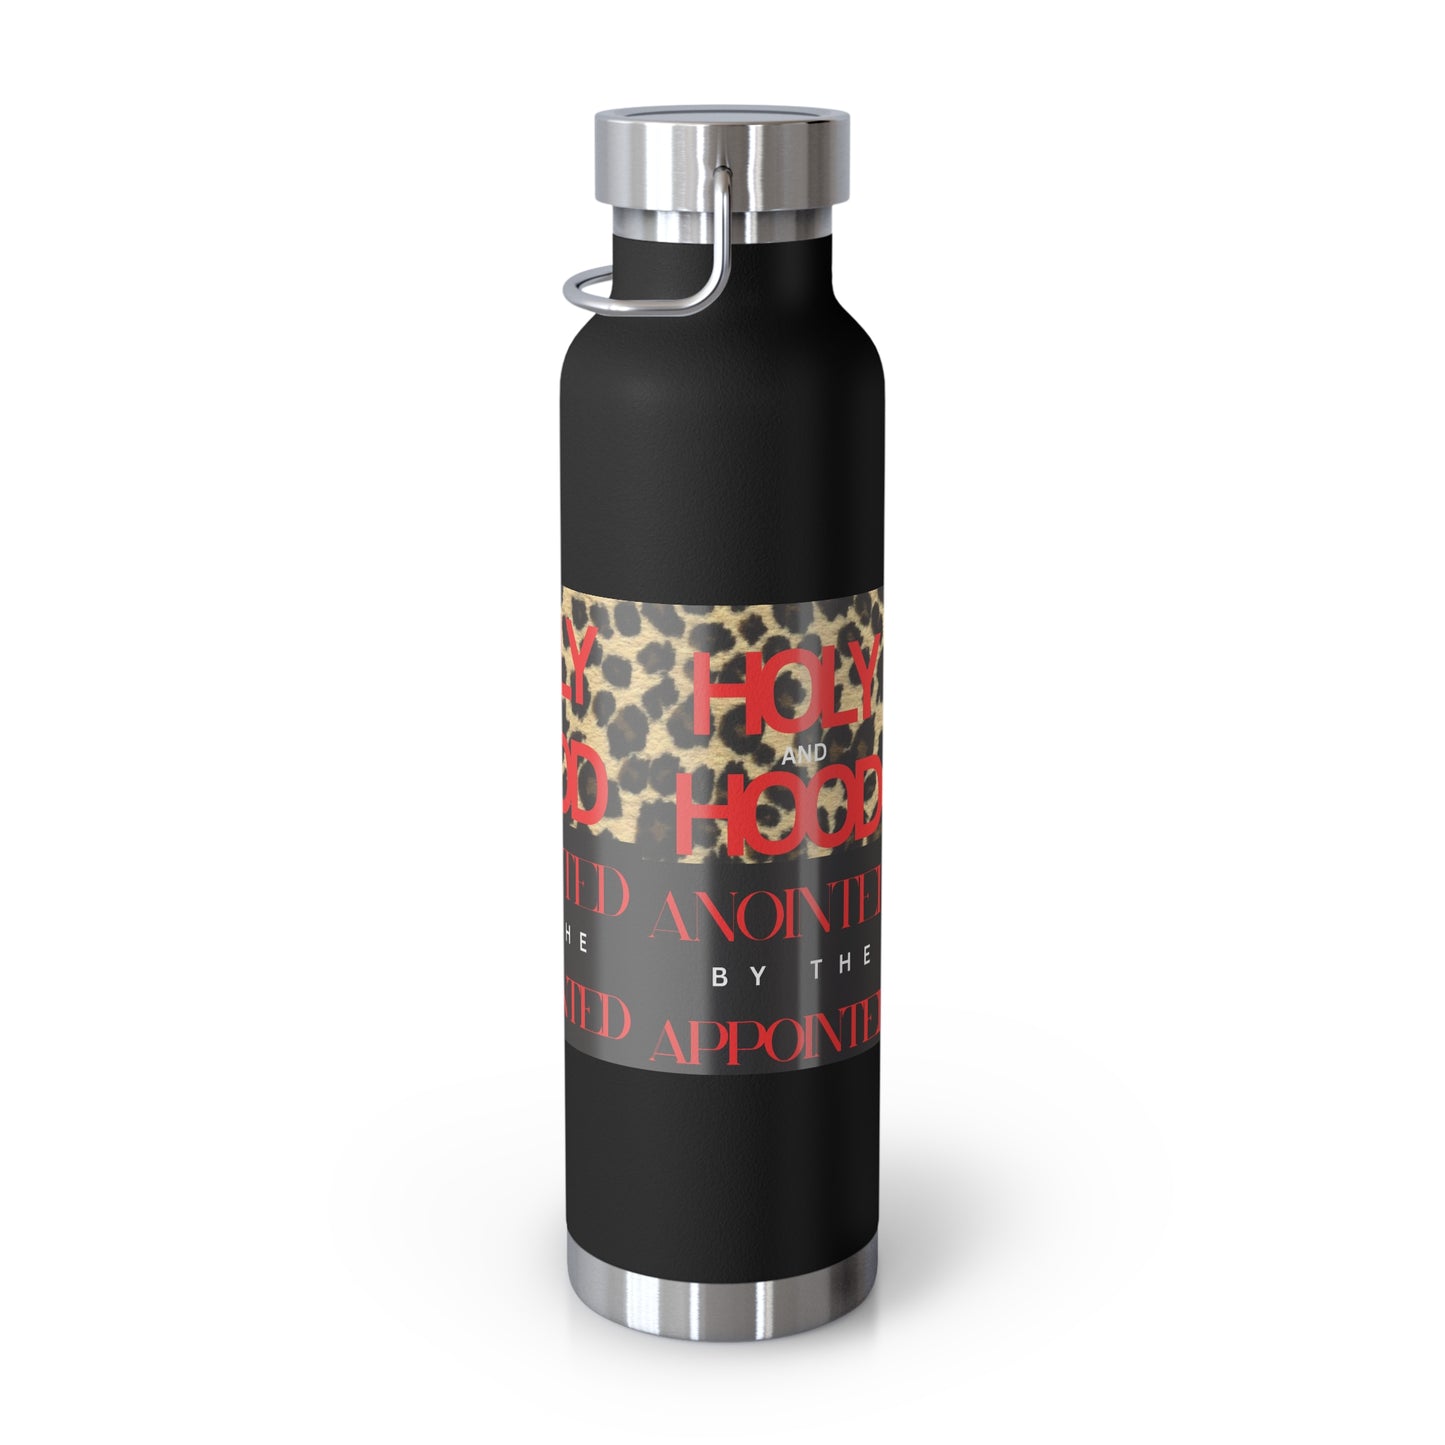 Holy and Hood Copper Vacuum Insulated Bottle, 22oz